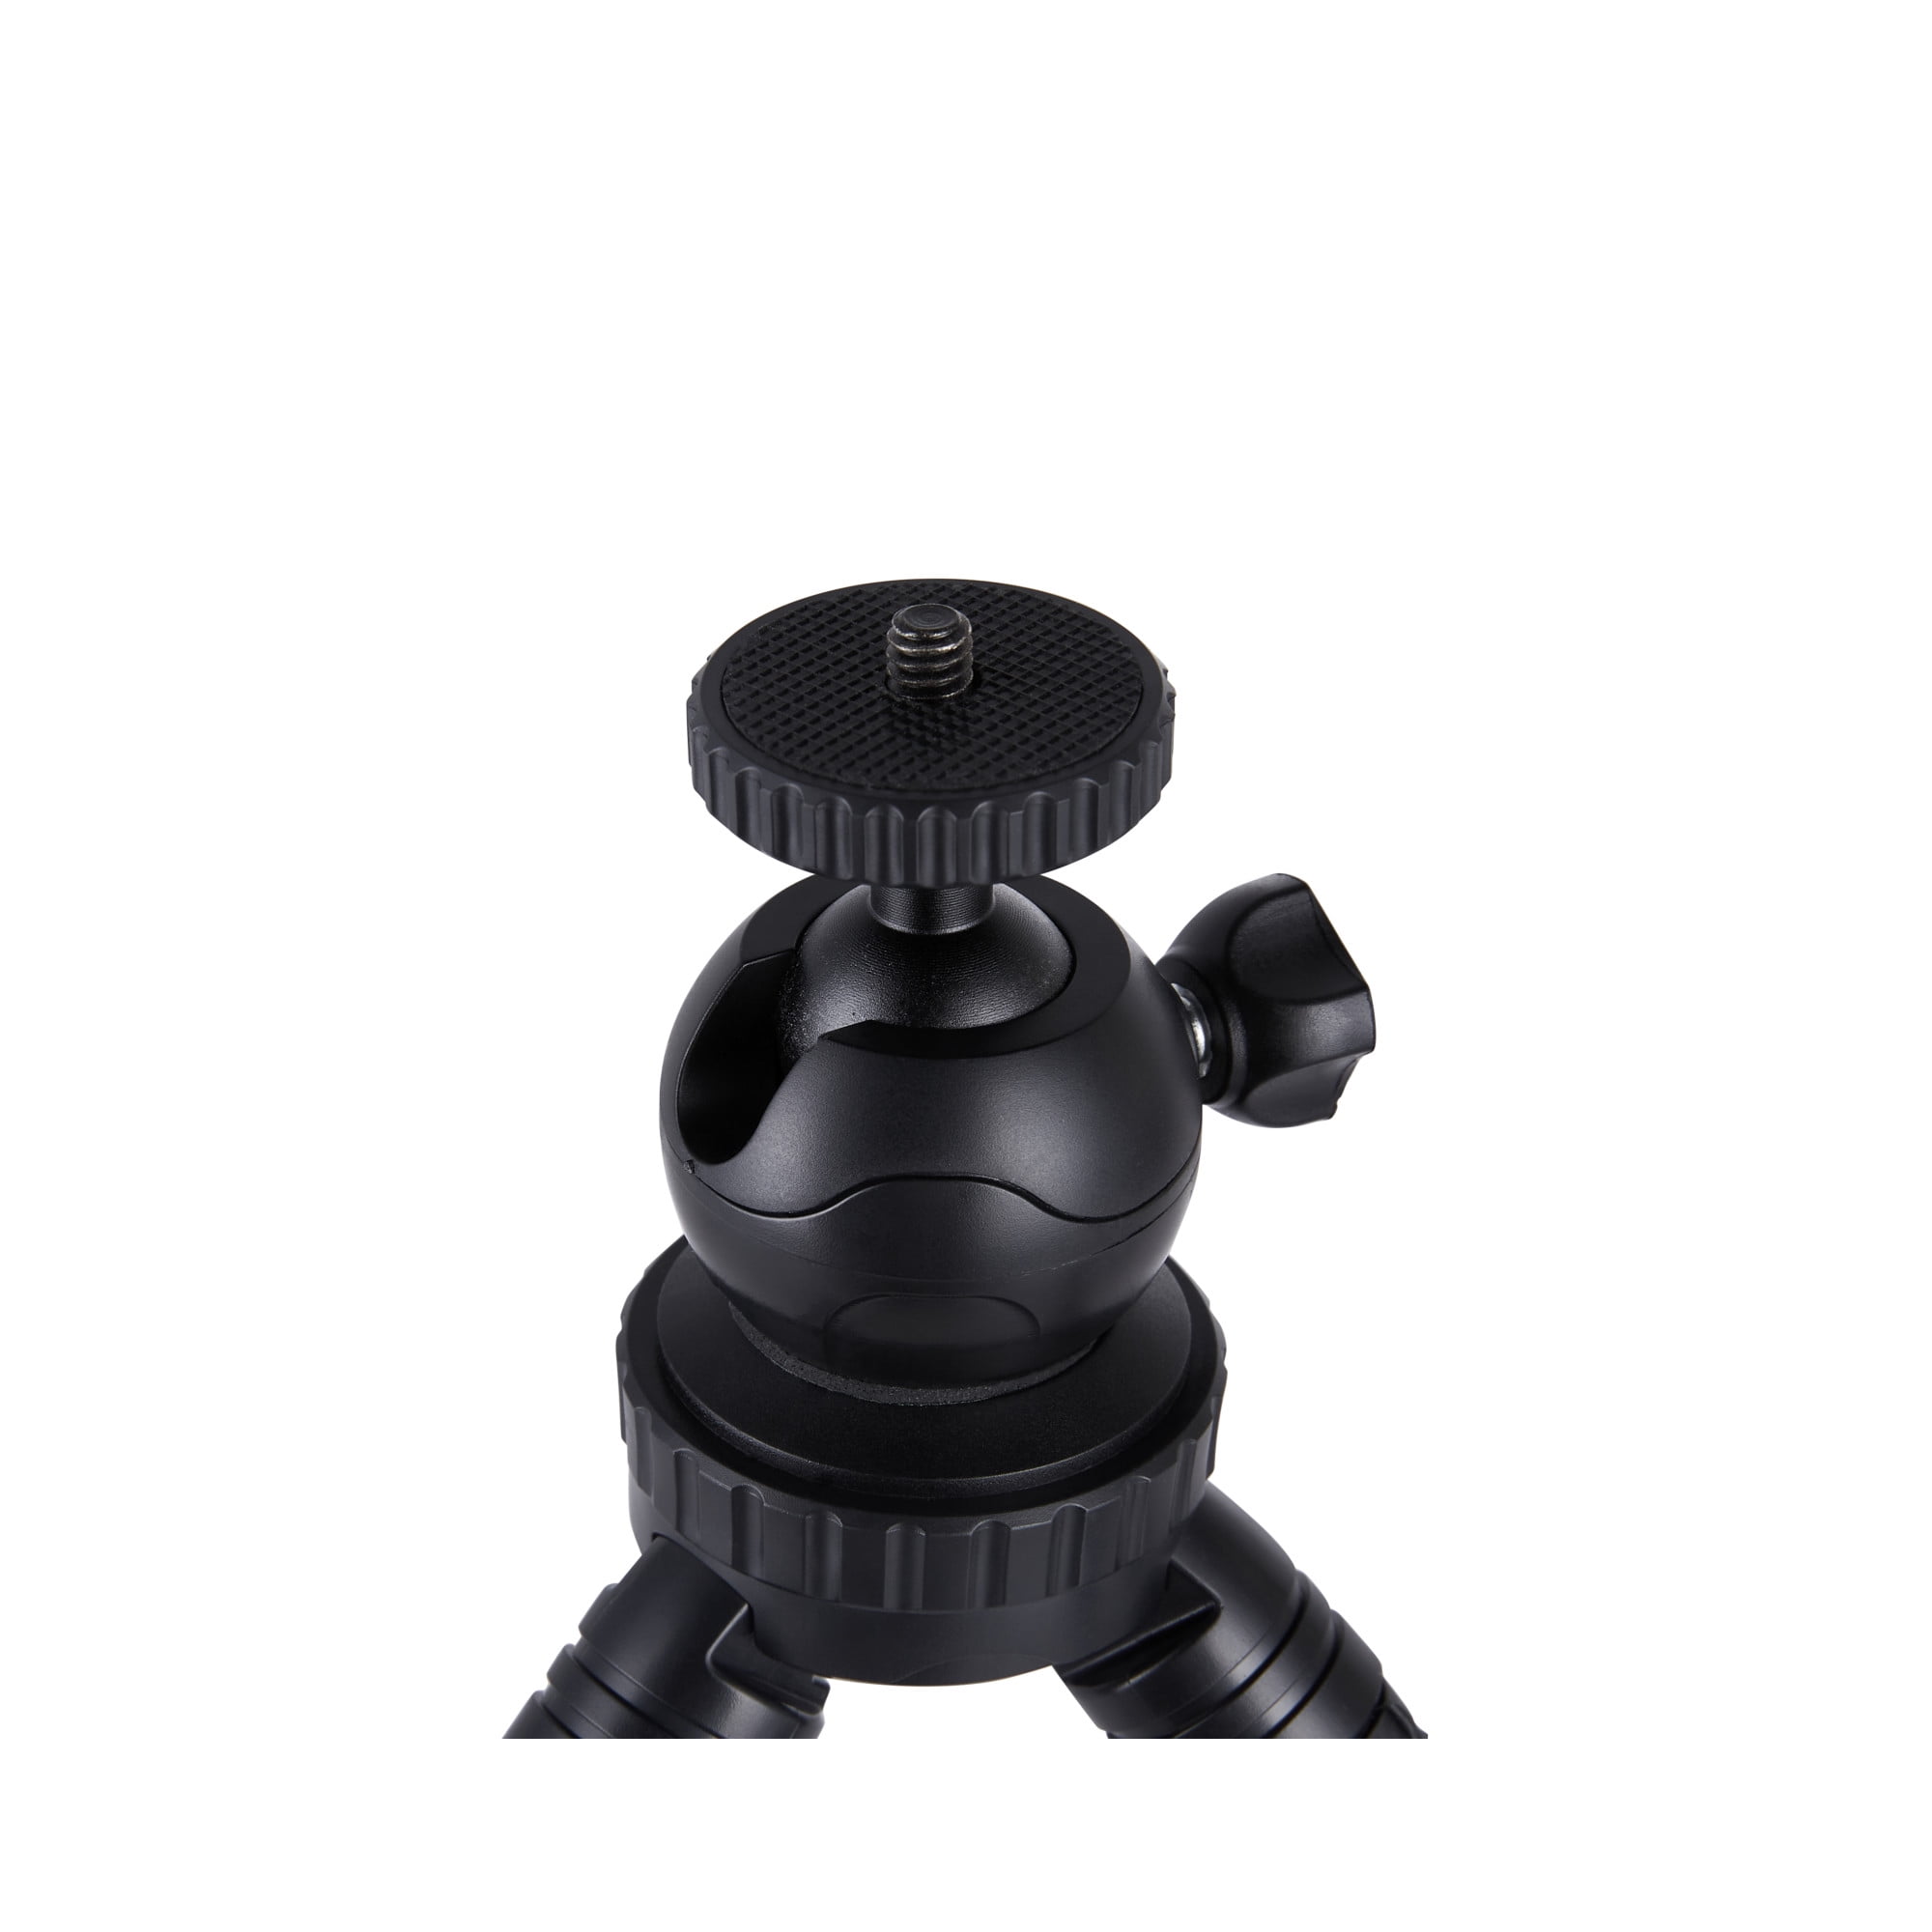 Webcam Tripod, EMEET Professional Webcam Mini Tripod, Portable &  Lightweight, Adjustable Height from 5.7-12.2 in, Stable Use, Universal  Compatible for Most Webcams/Phones/GoPros/Mirrorless Cameras